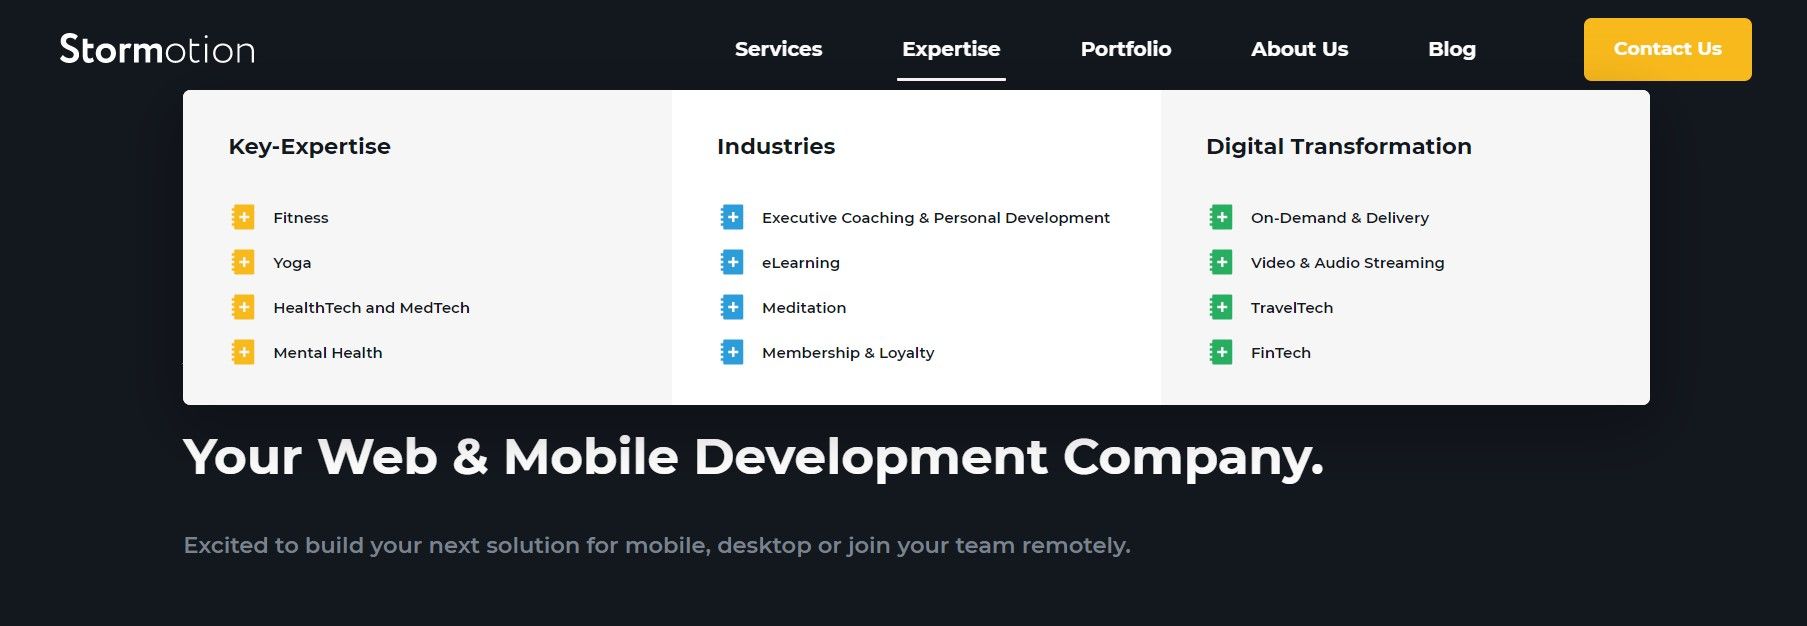 If you decide to outsource app development, you get access to outsourcing companies with a more extensive expertise, compared to in-house software development teams (*shots from [Stormotion](https://landing.stormotion.io/){ rel="nofollow" target="_blank" .default-md}*)